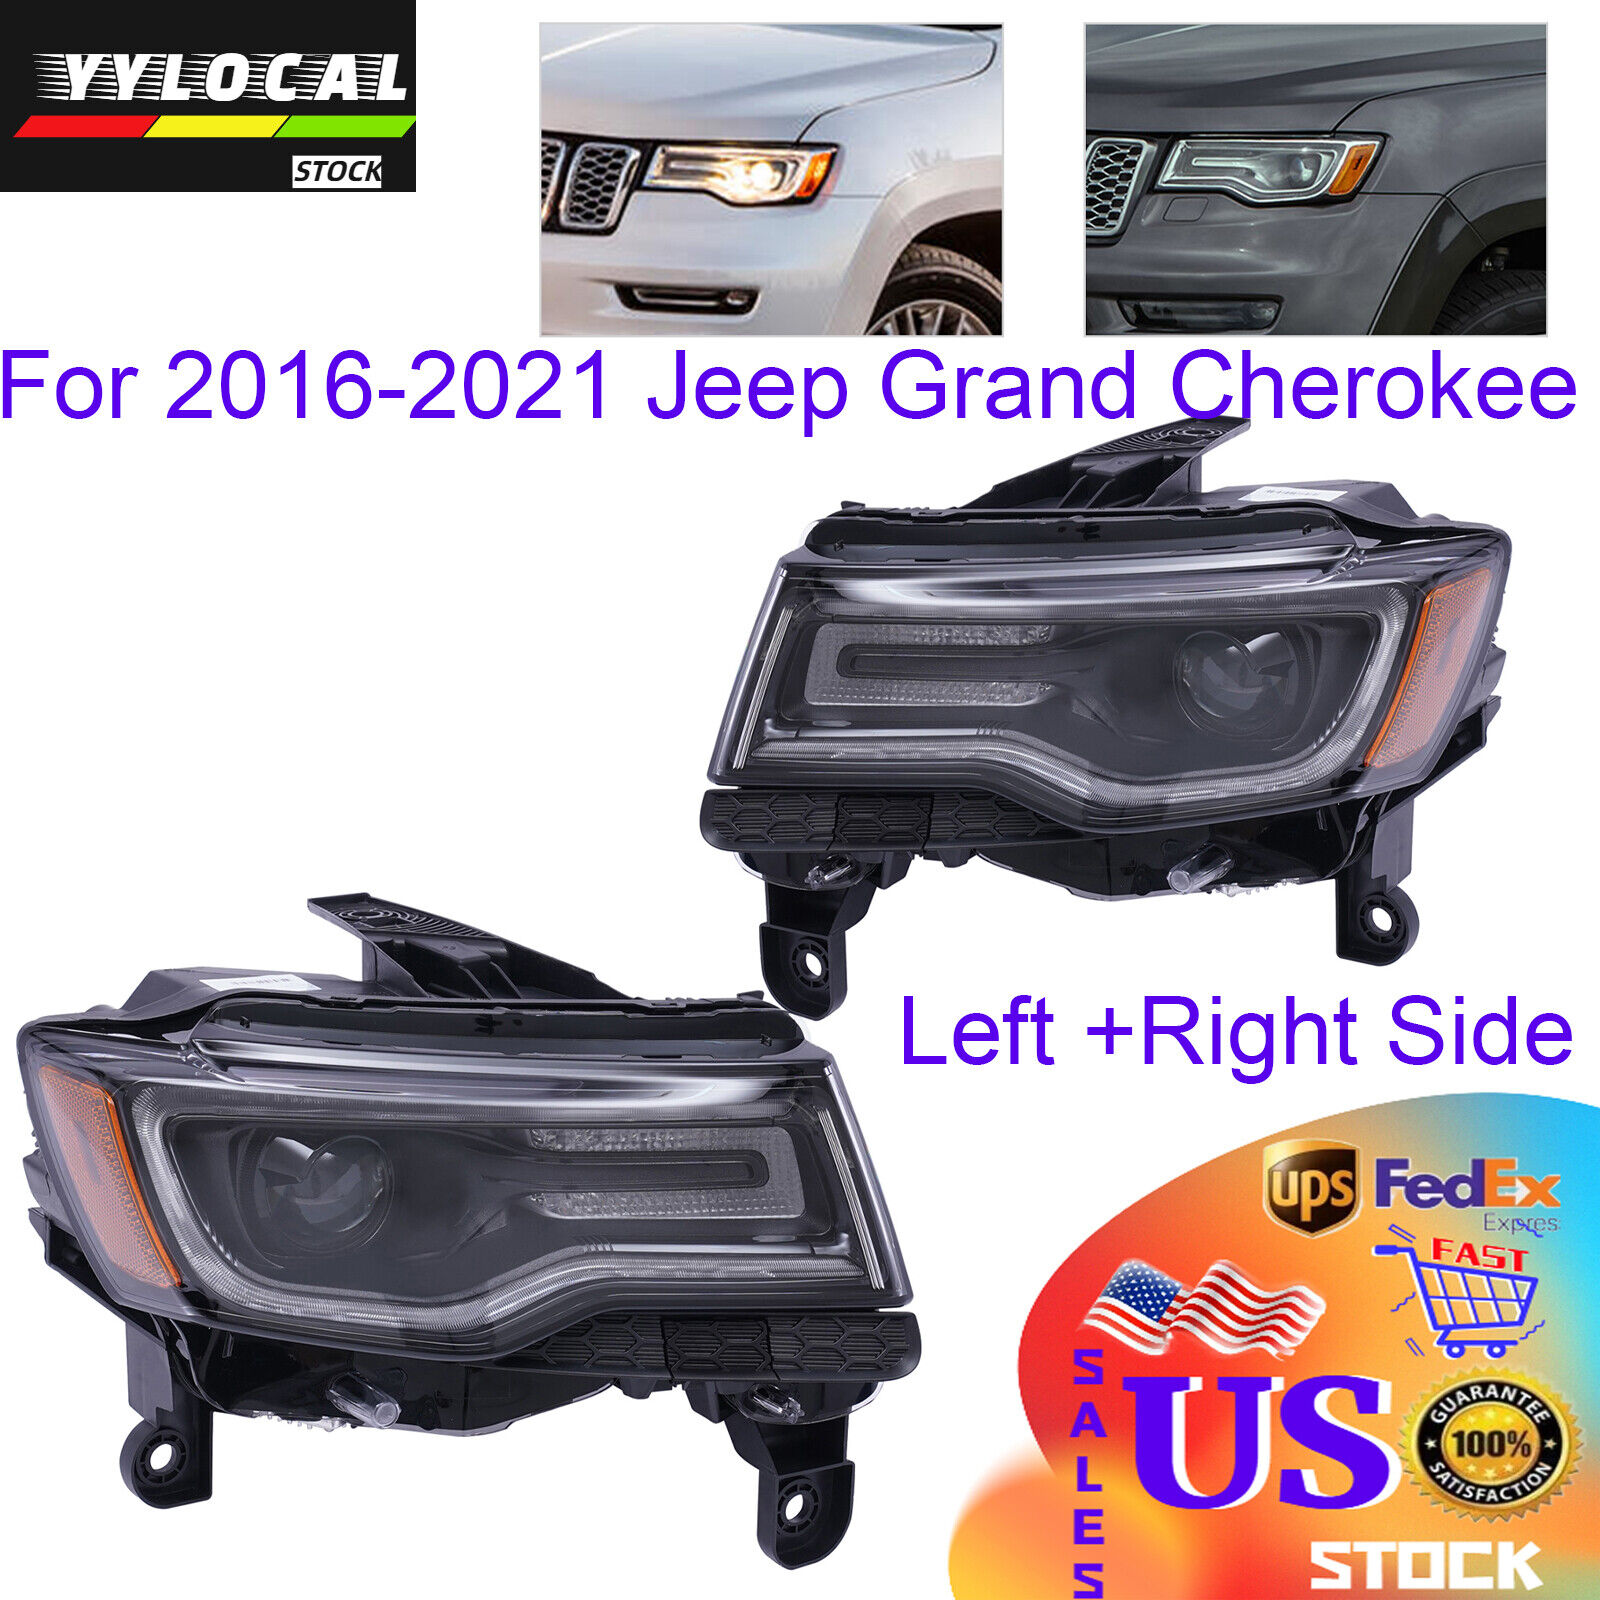 For 2016-2021 Jeep Grand Cherokee Xenon LED HID Headlight Left Right Side LH RH